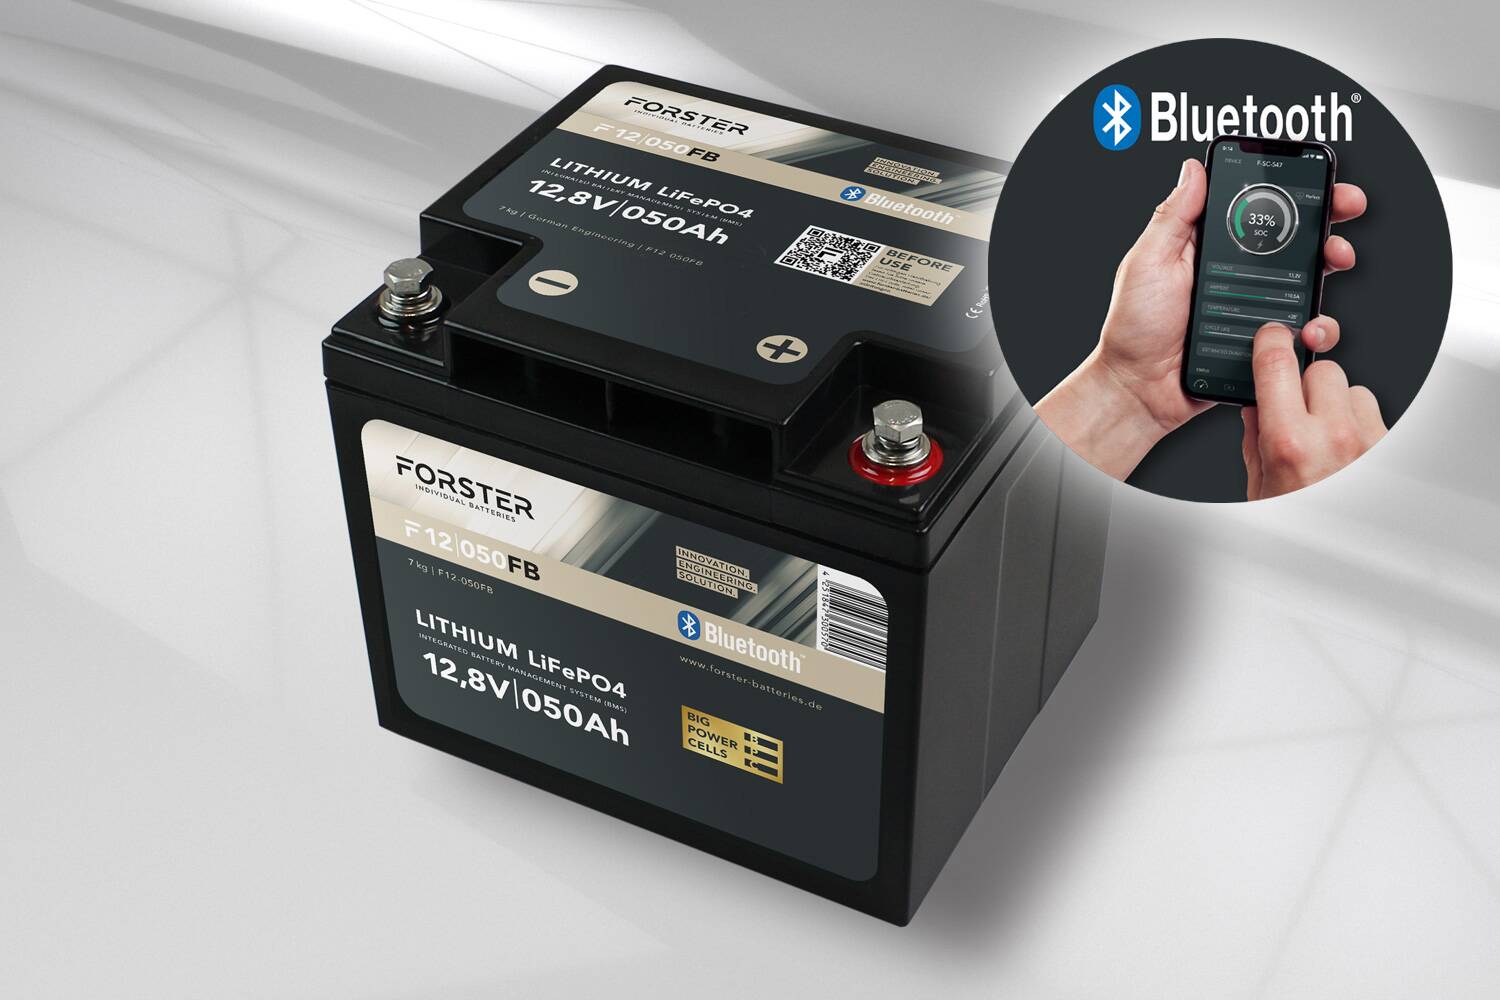 12 V 50 Ah Forster Fishing Battery with Bluetooth